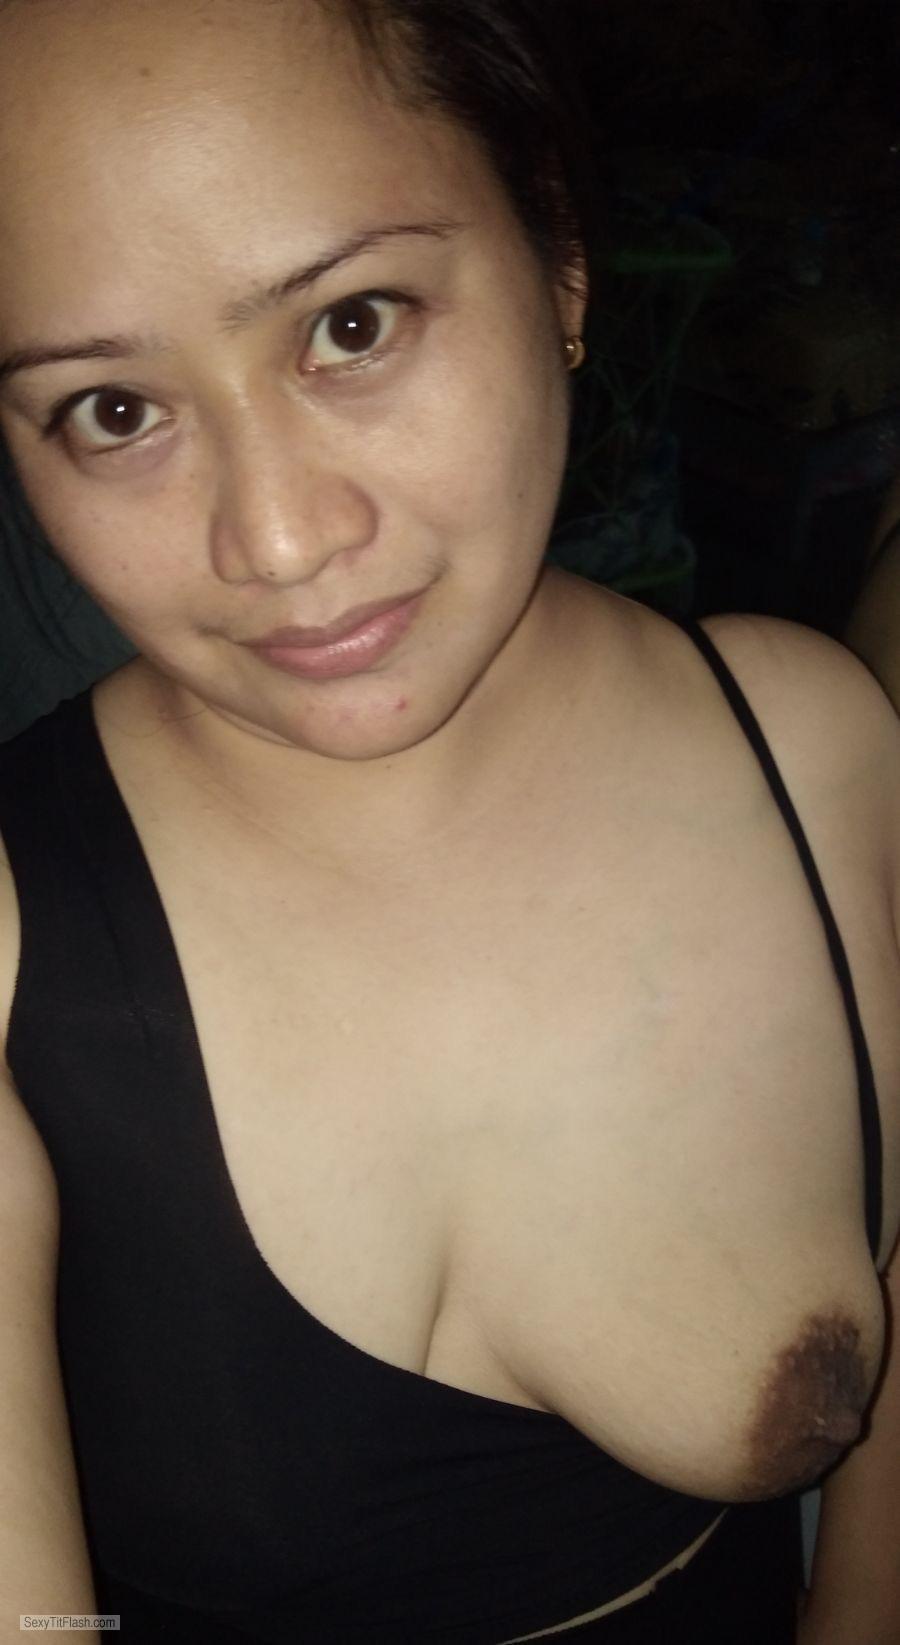 Tit Flash: Wife's Medium Tits (Selfie) - Topless Sexy Filipina from Philippines